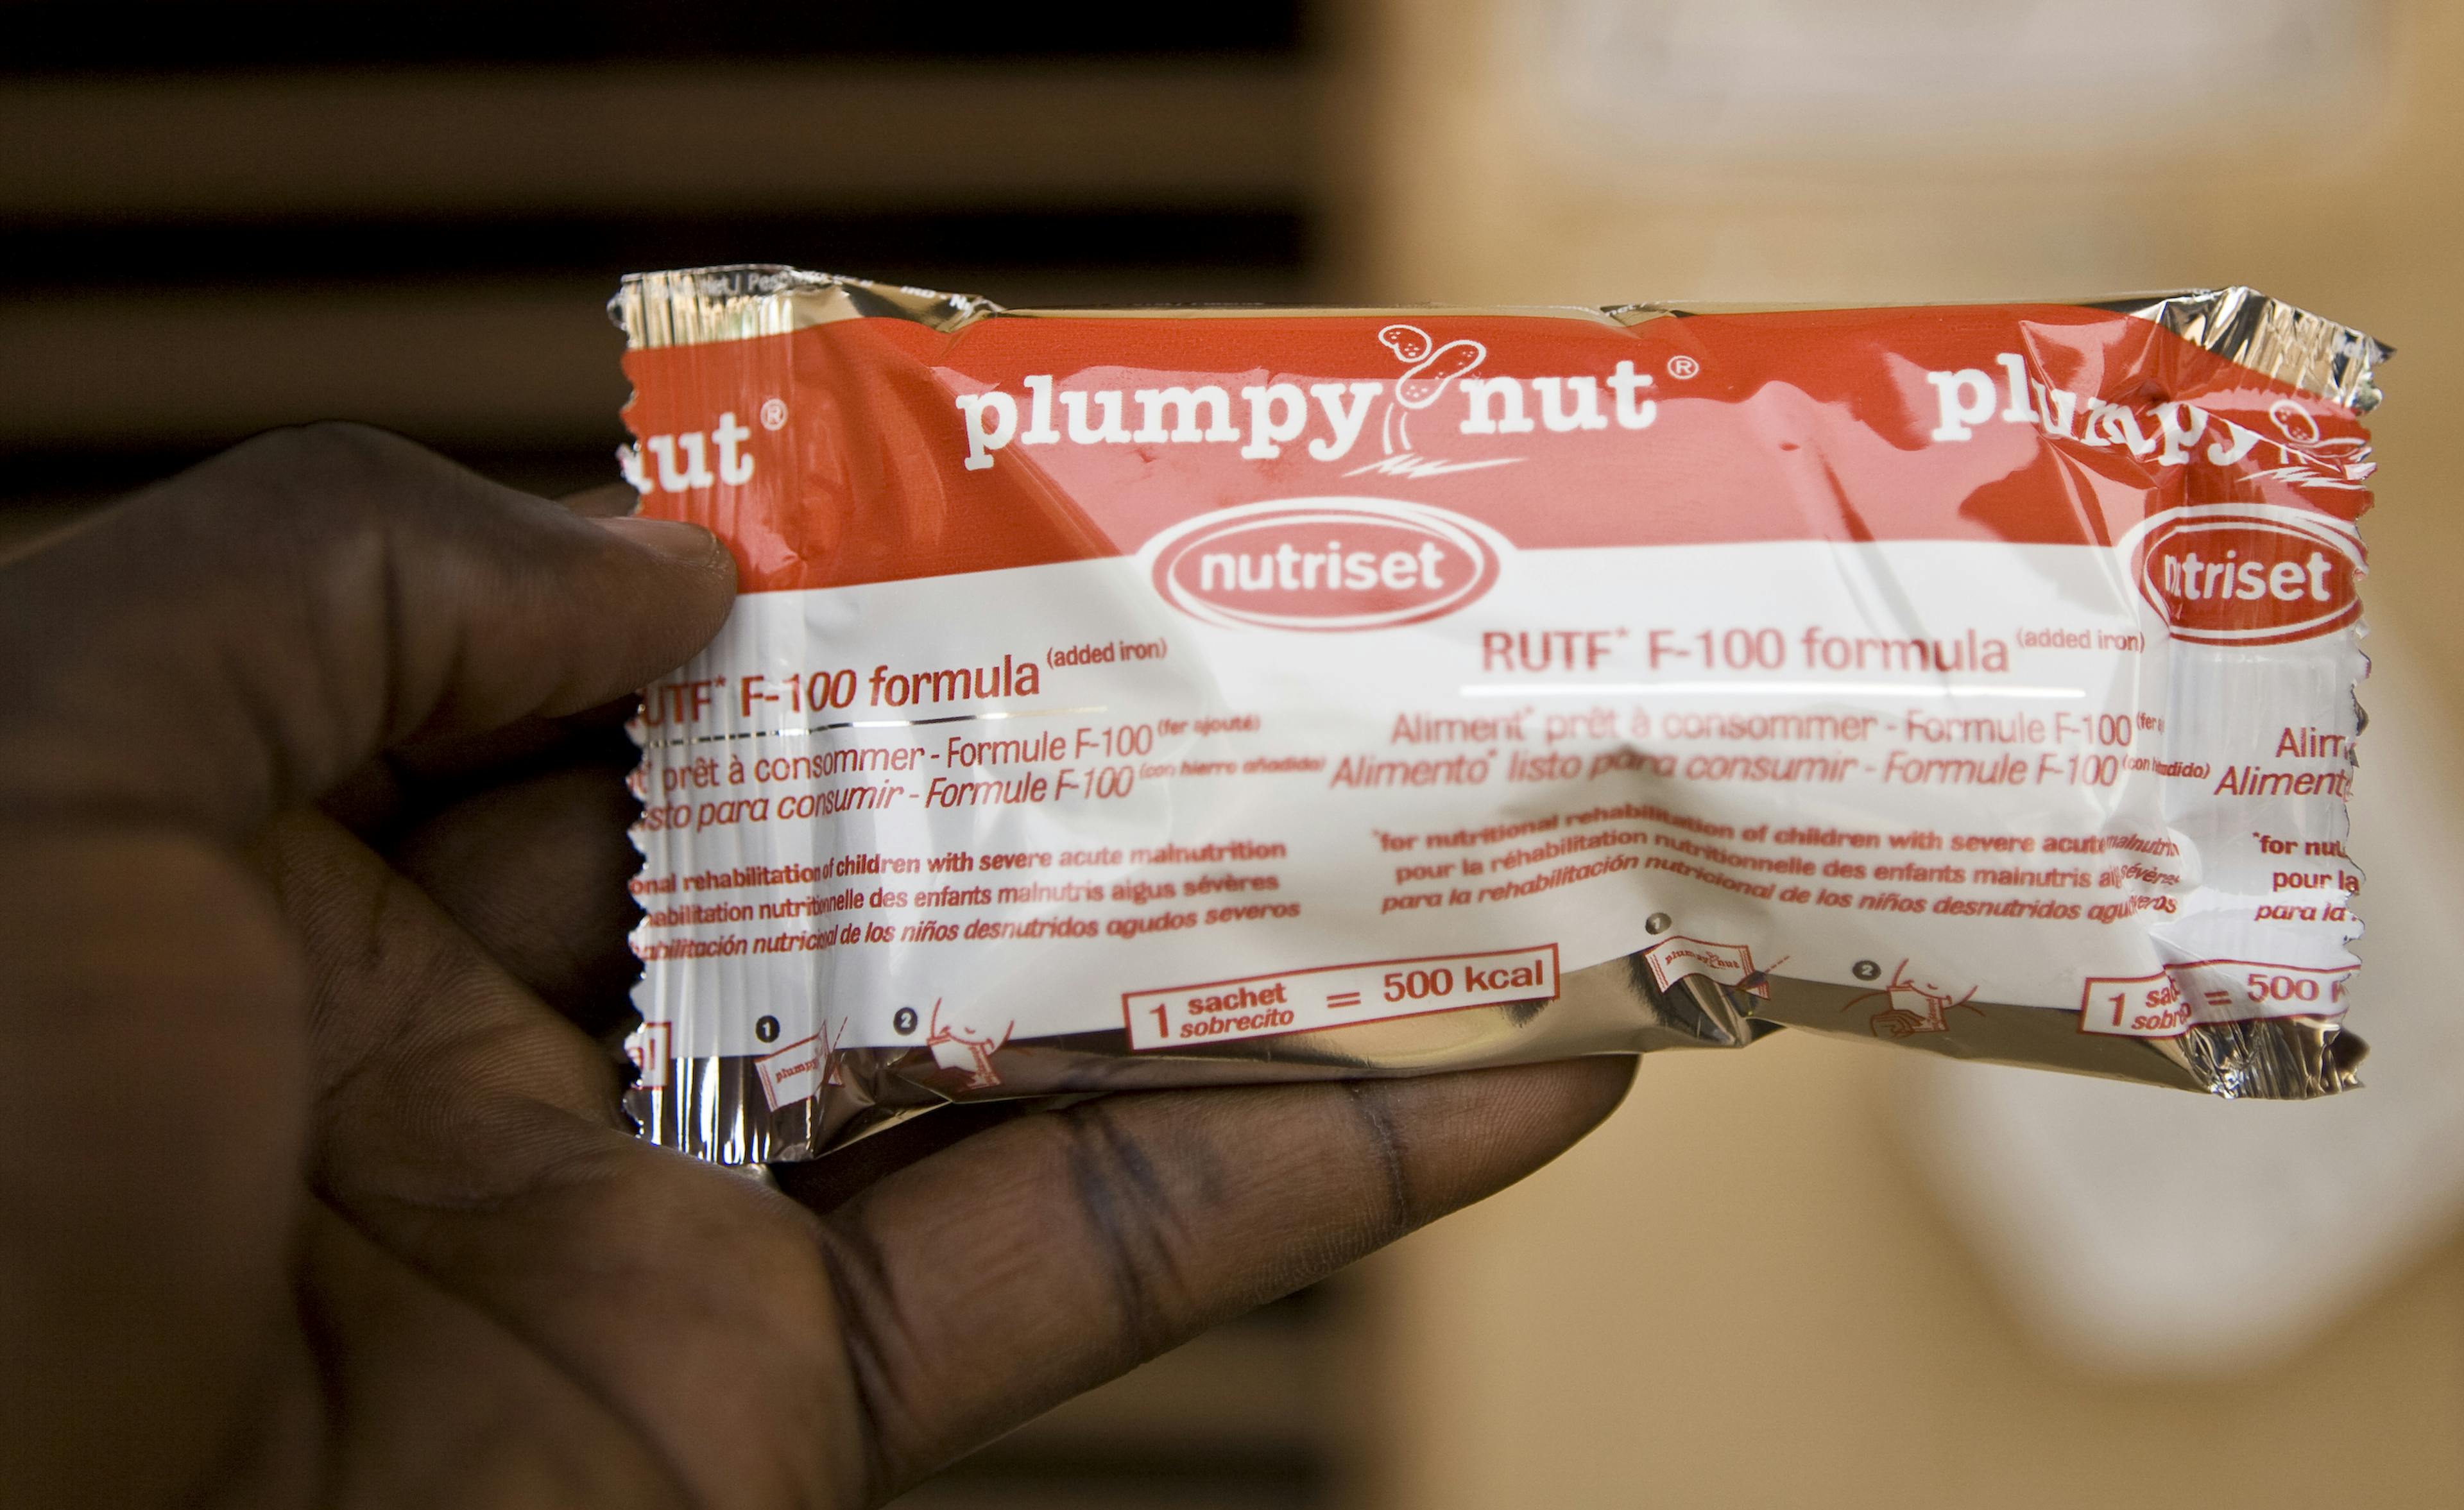 March 2012, the Health Center of Reference Konio, Plumpy'nut, nutritional paste that is given to malnourished children, Djenne, Mopti Region.